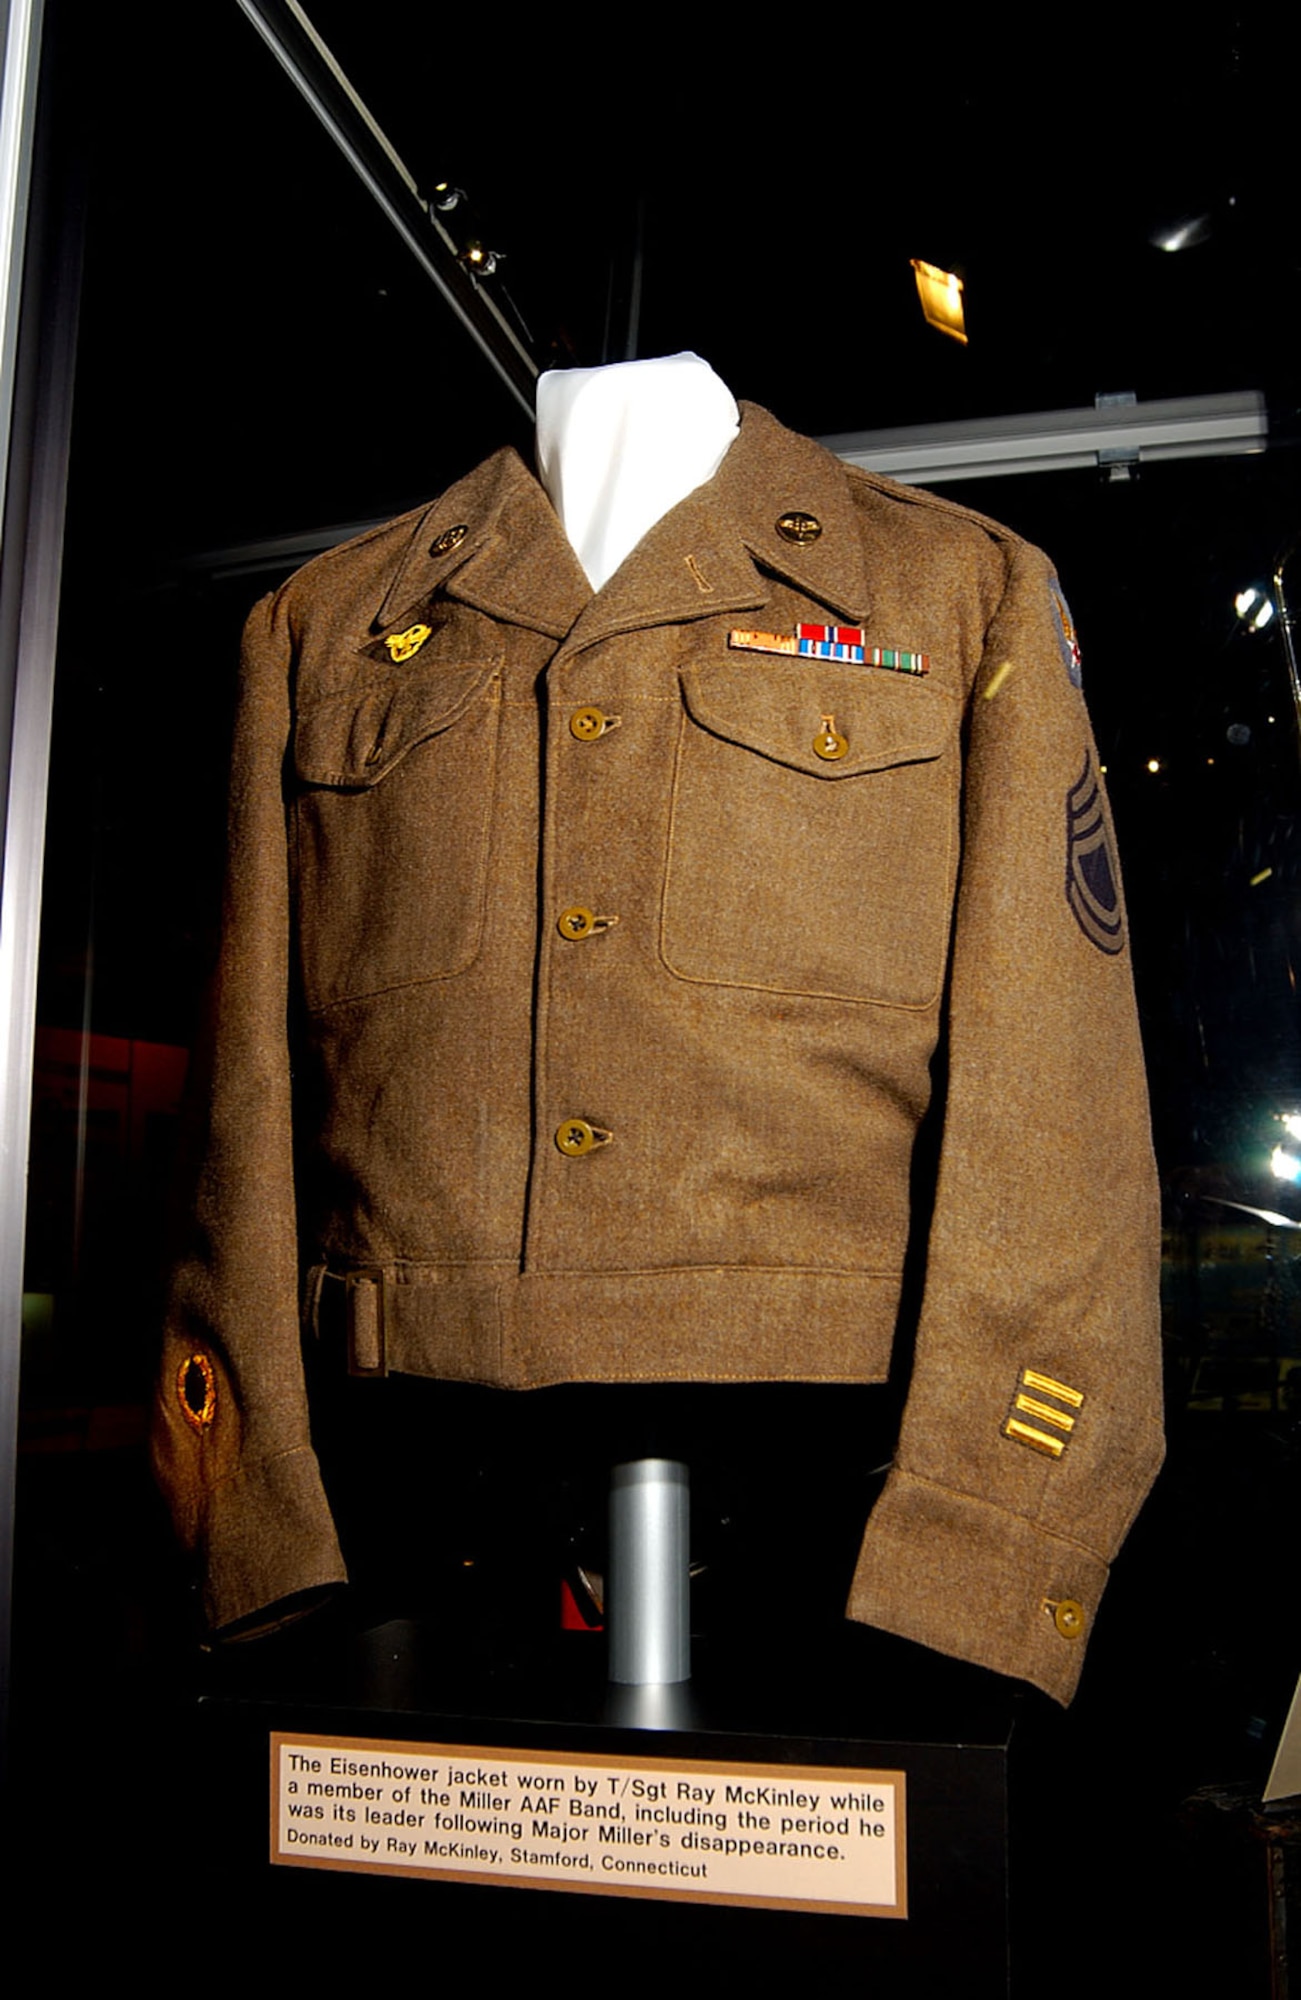 DAYTON, Ohio -- Eisenhower jacket worn by Tech. Sgt. Ray McKinley while a member of the Maj. Glenn Miller Army Air Force Band, including the period he was its leader following Maj. Miller's disappearance. The jacket, donated by Ray McKinley of Stamford, Conn., is on display in the World War II Gallery at the National Museum of the U.S. Air Force. (U.S. Air Force photo)